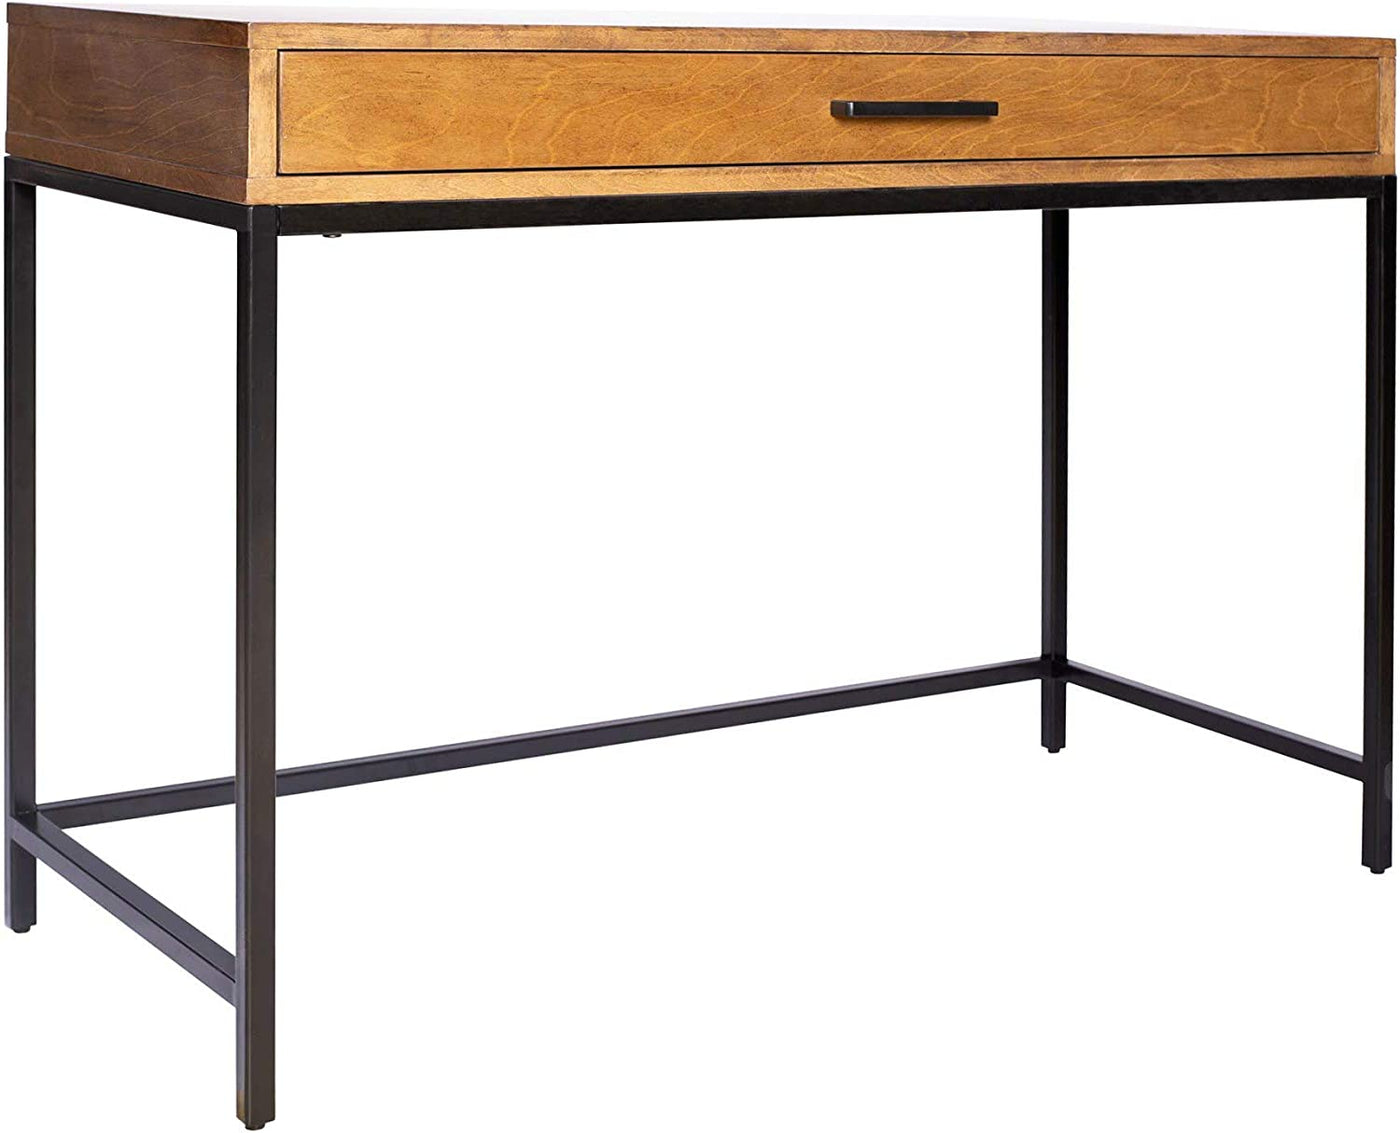 Amazon Brand – Rivet Avery Industrial Home Office Writing Desk with Metal Base, 40"W, Chestnut Brown Finish - $100